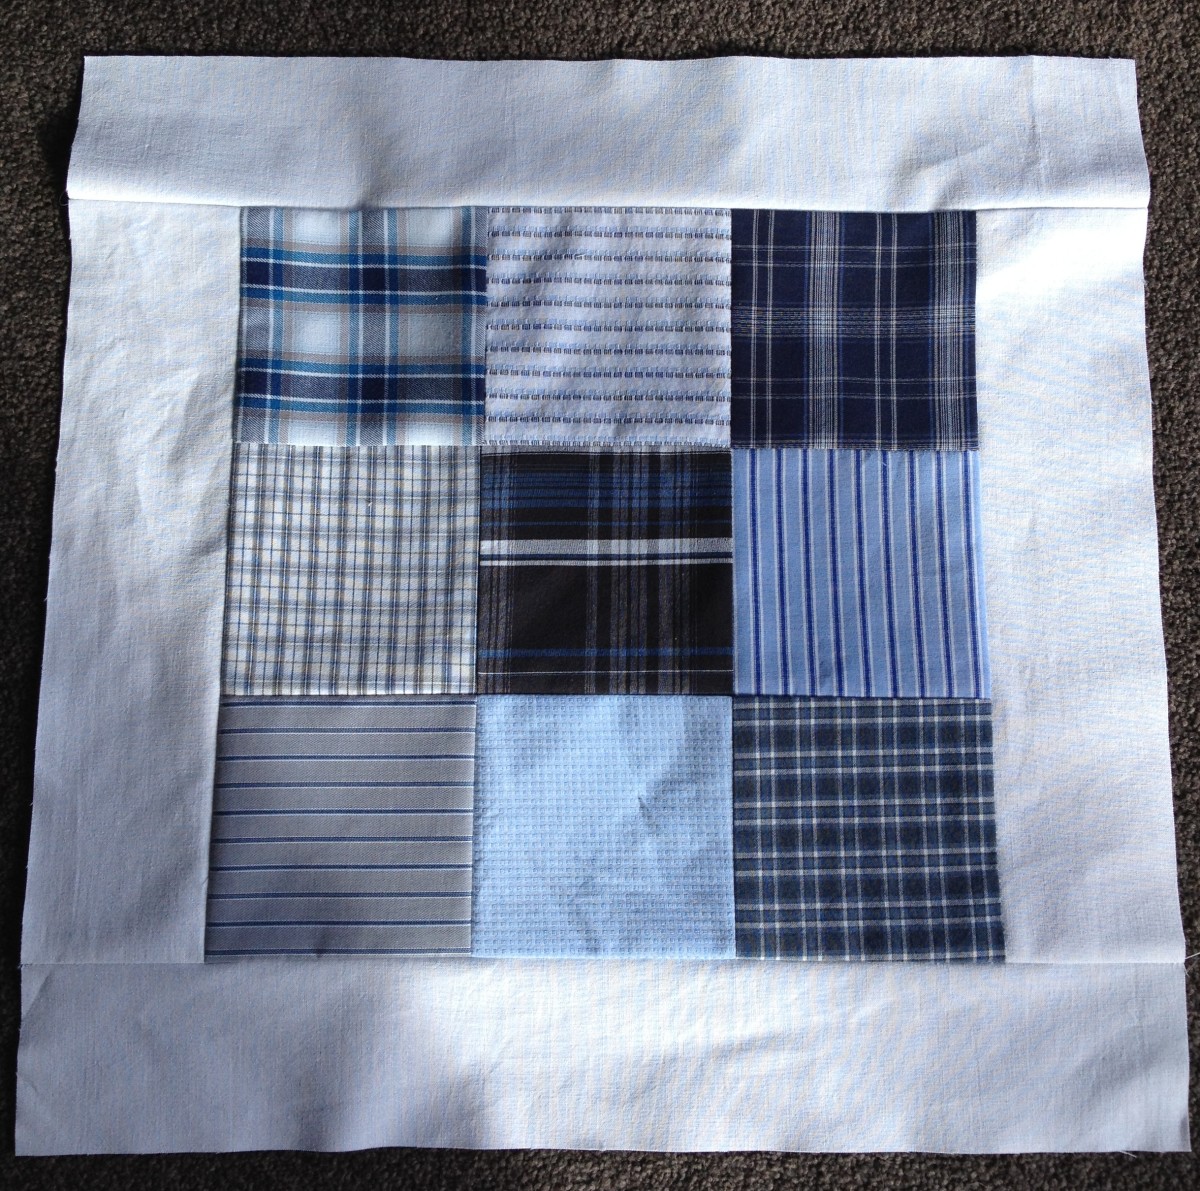 A nine-block square section of an upcycled men's shirt quilt